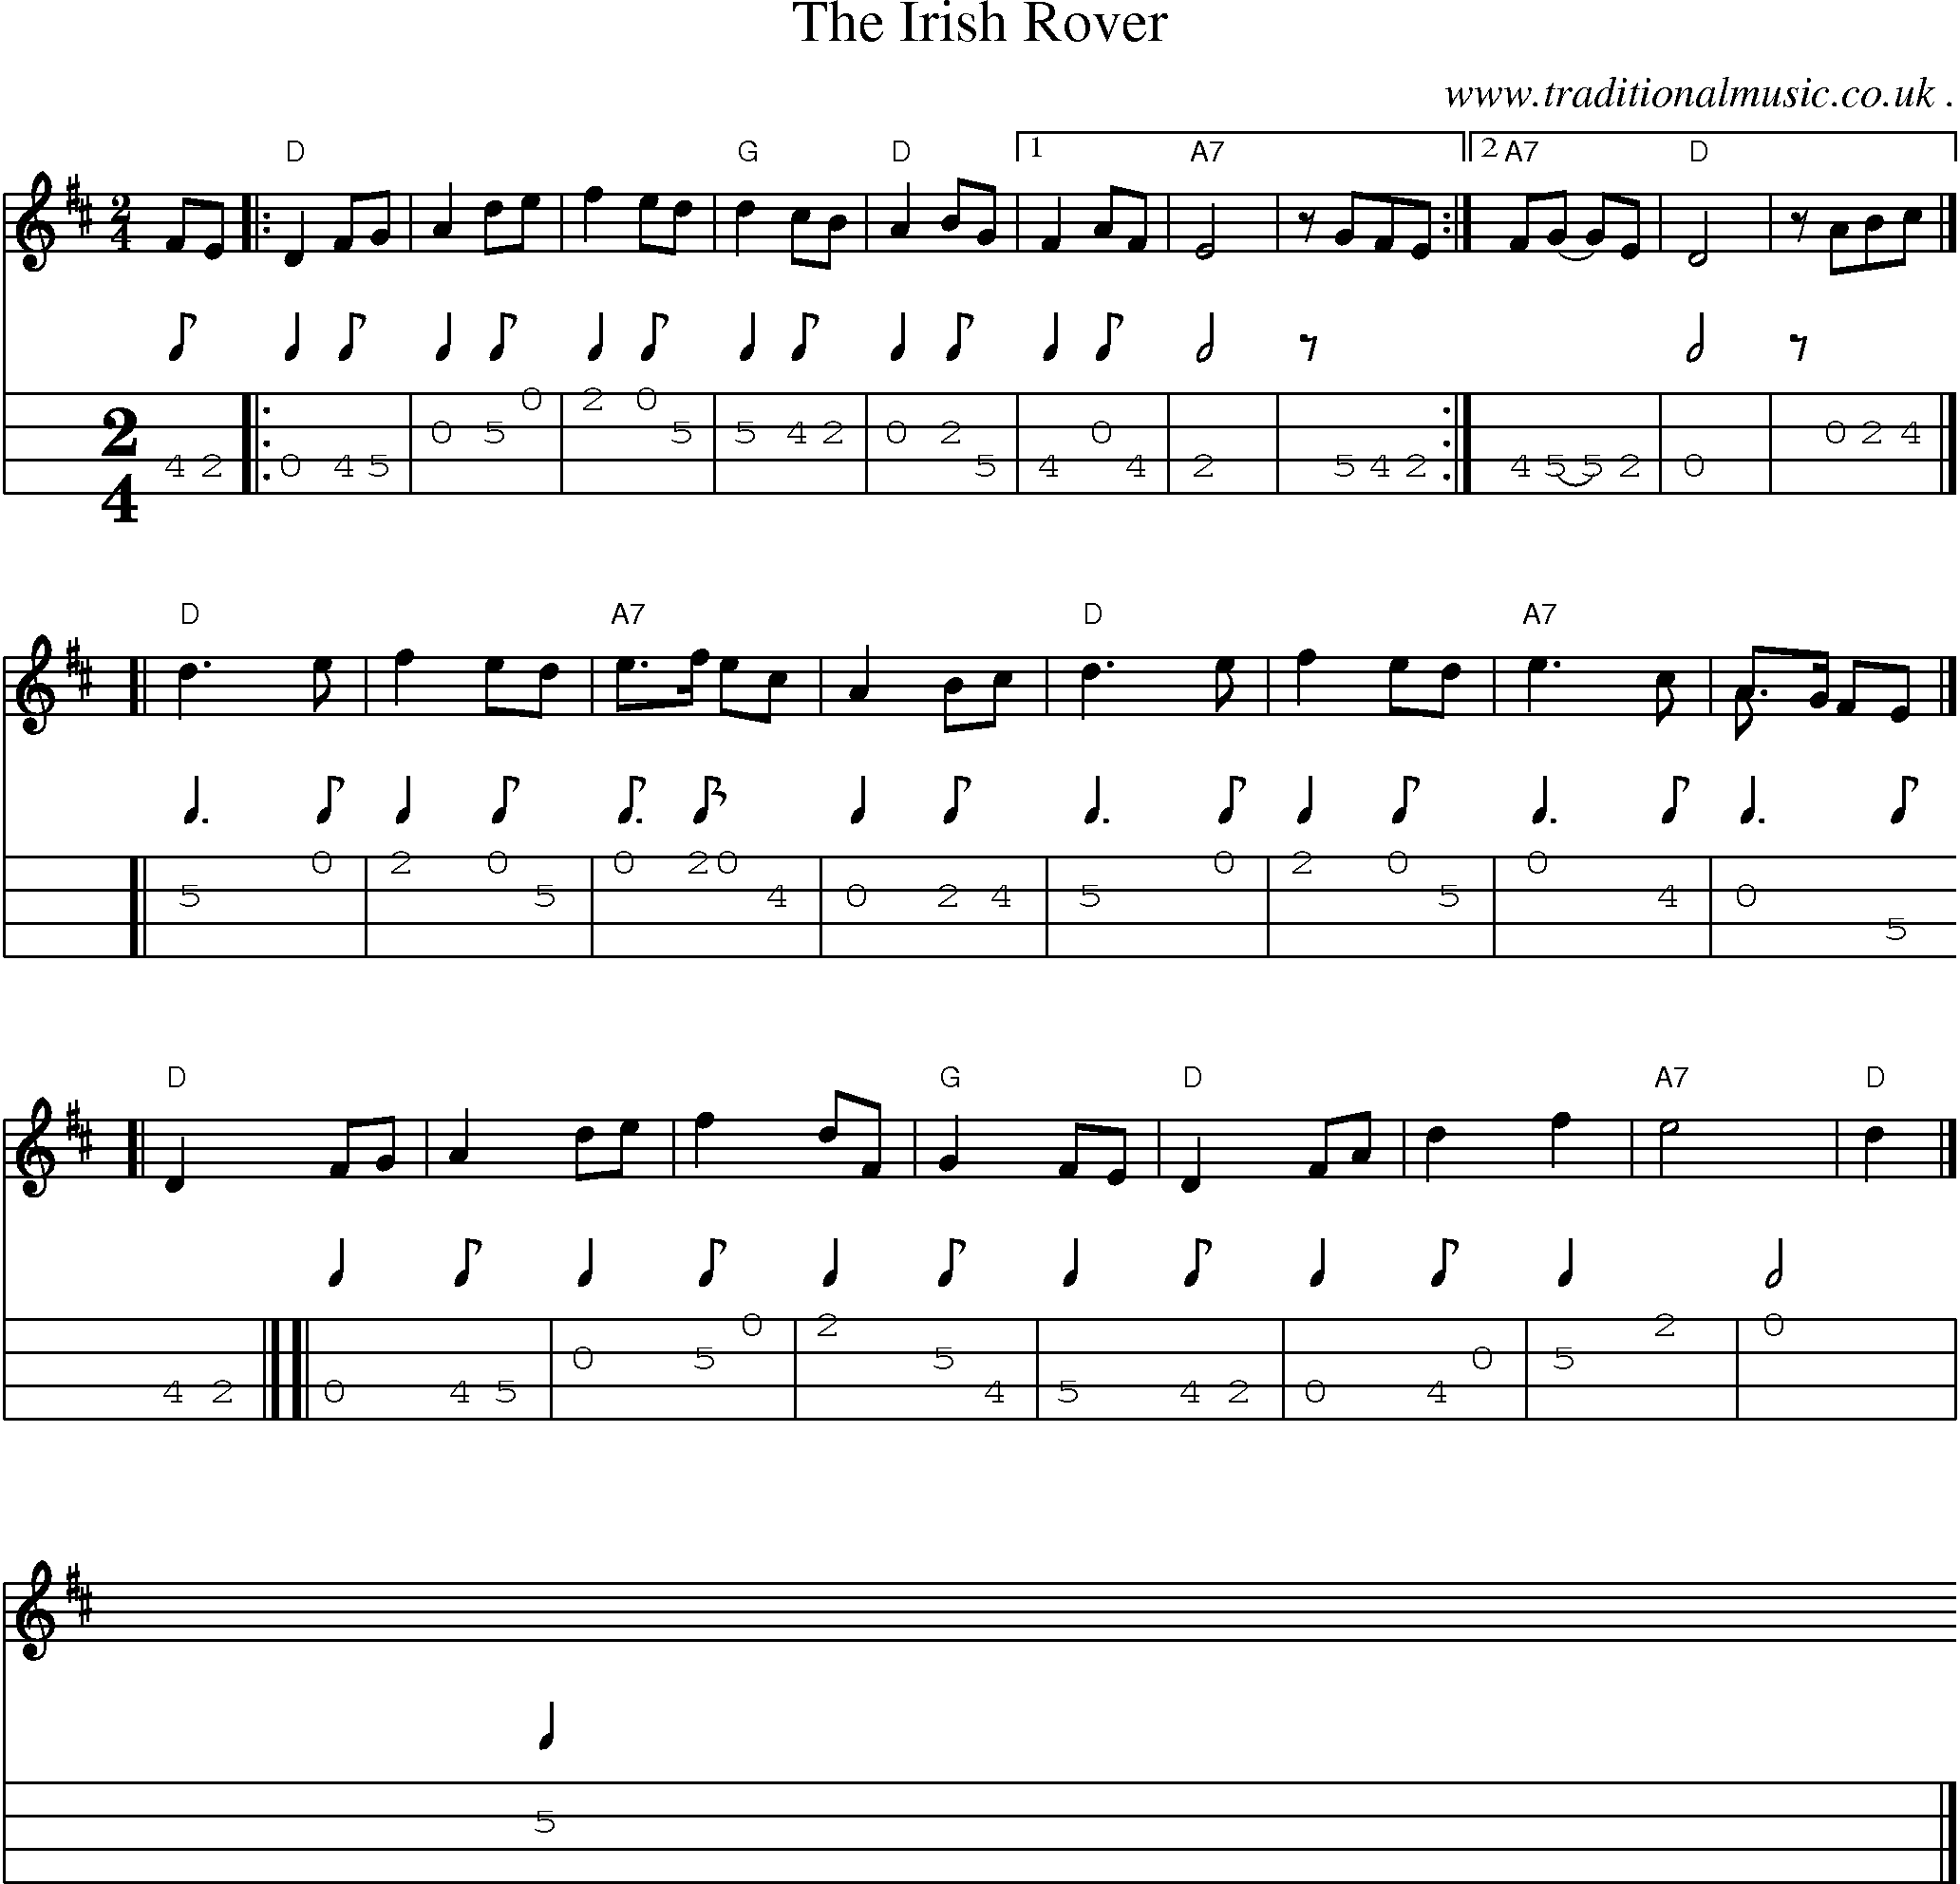 Sheet-music  score, Chords and Mandolin Tabs for The Irish Rover